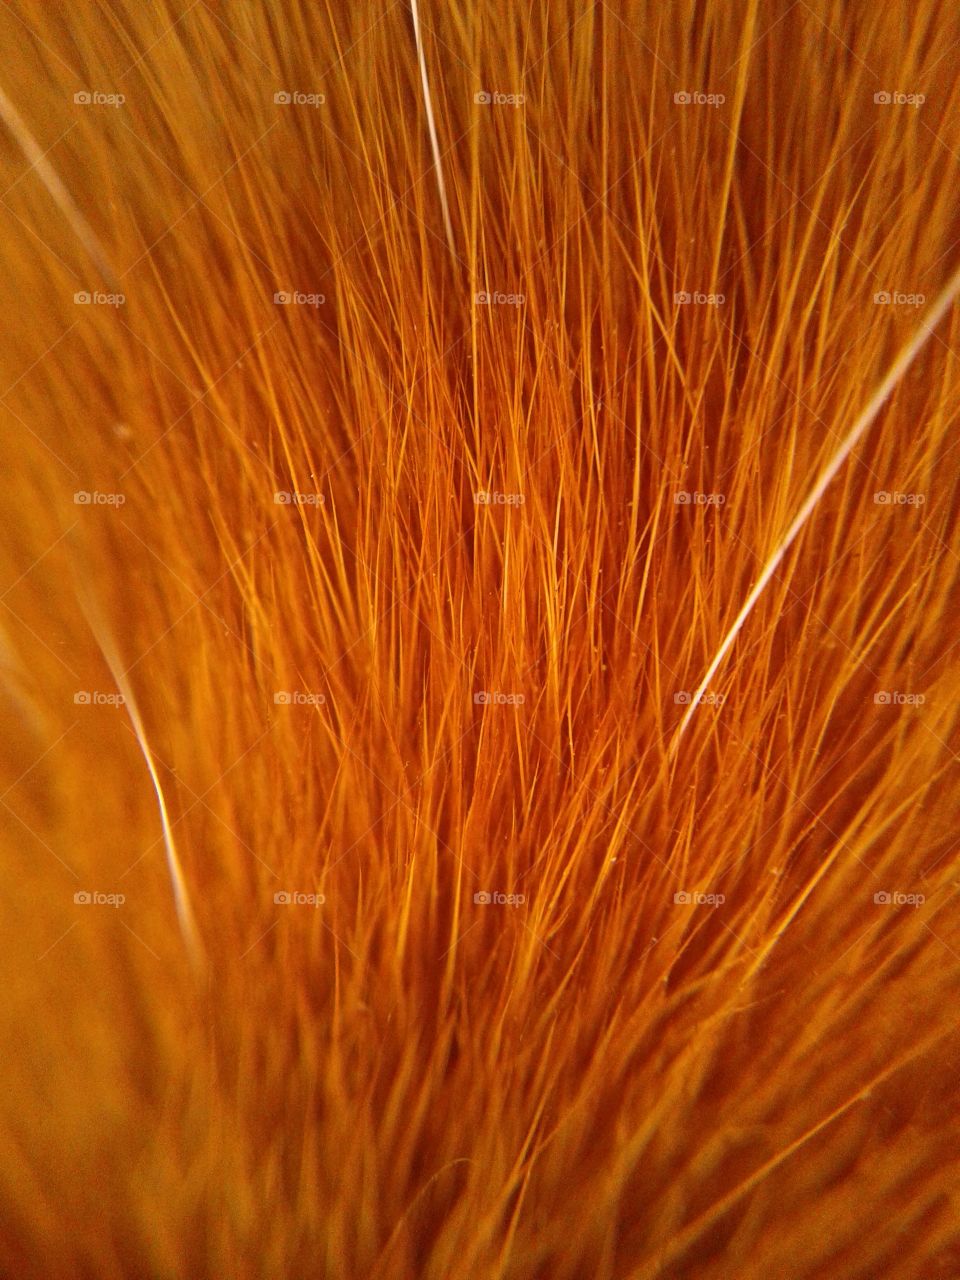 Extreme close-up of a cat fur